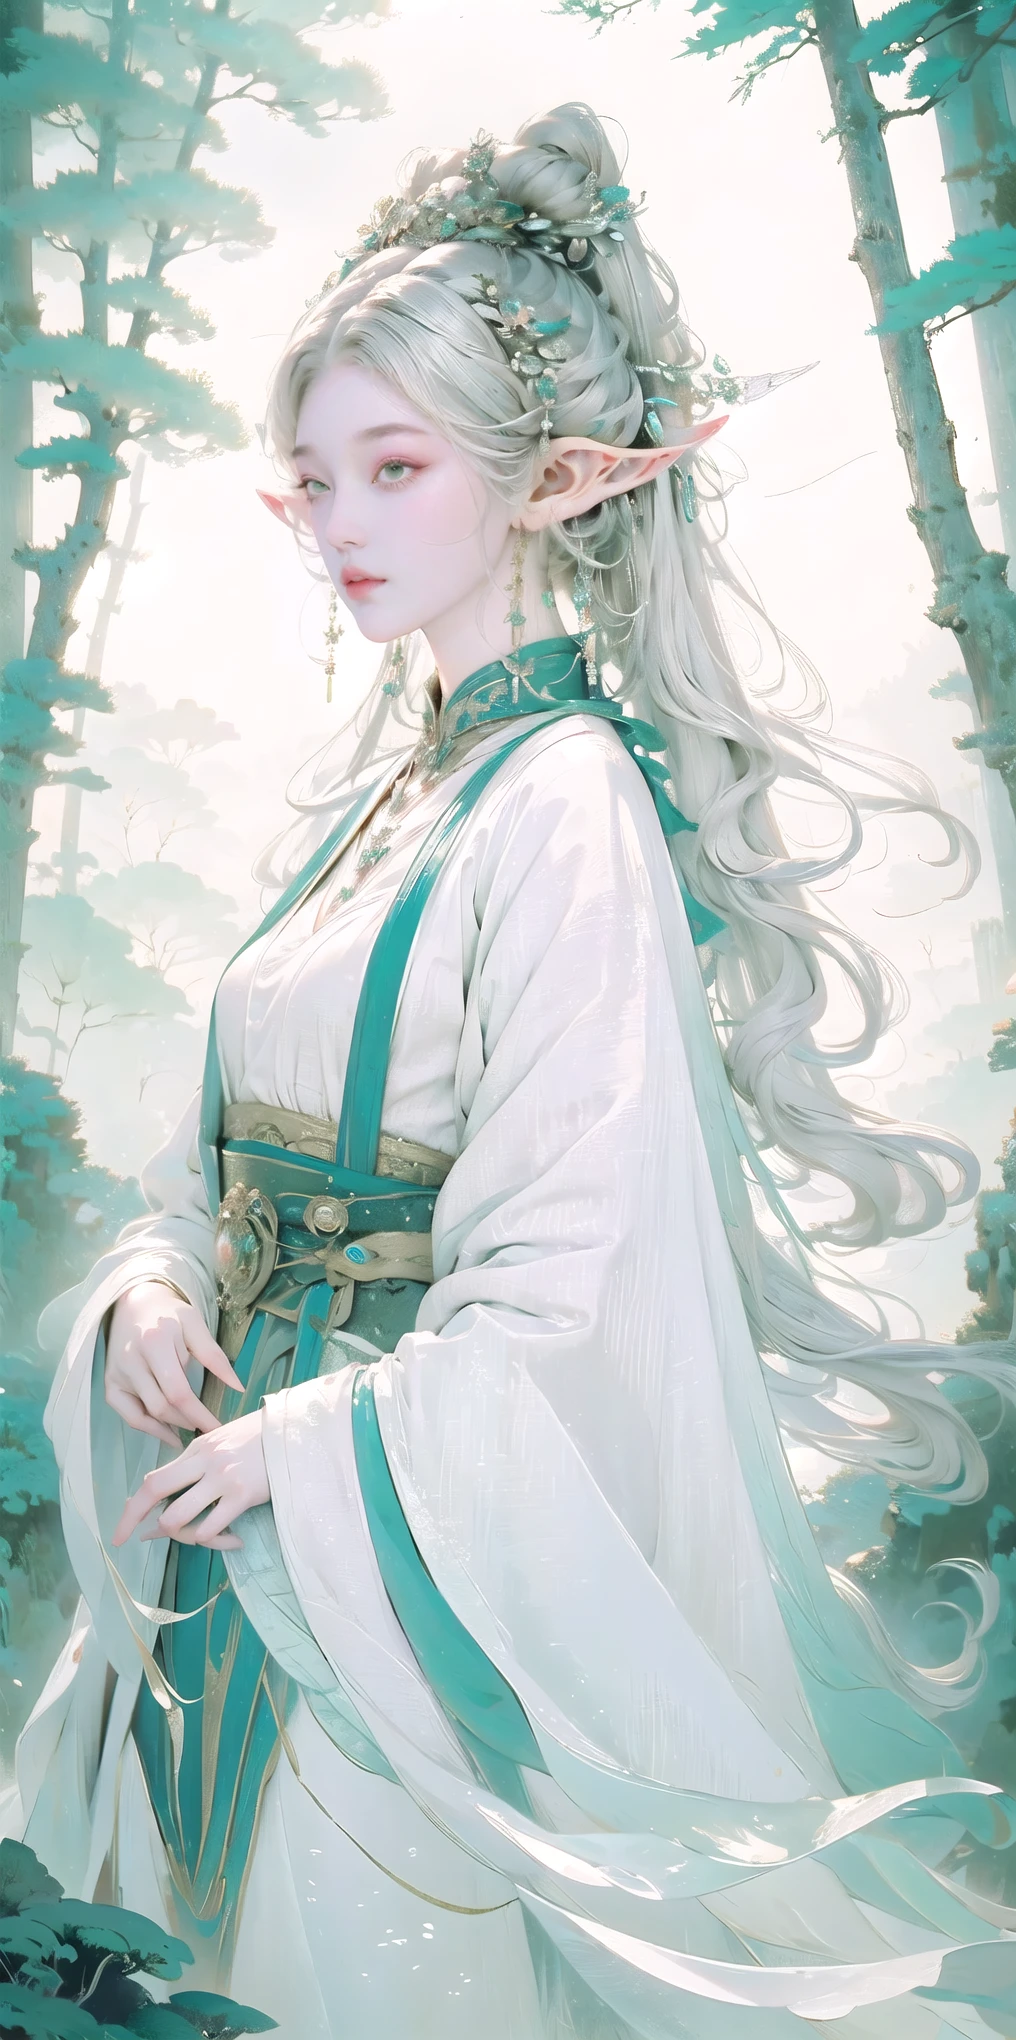 best quality,ultra-detailed,realistic,portrait,white gown,elf mage,staff,white twin tails,enchanted forest scenery,mystical lighting,fantasy,ethereal,colorful,soft pastel tones